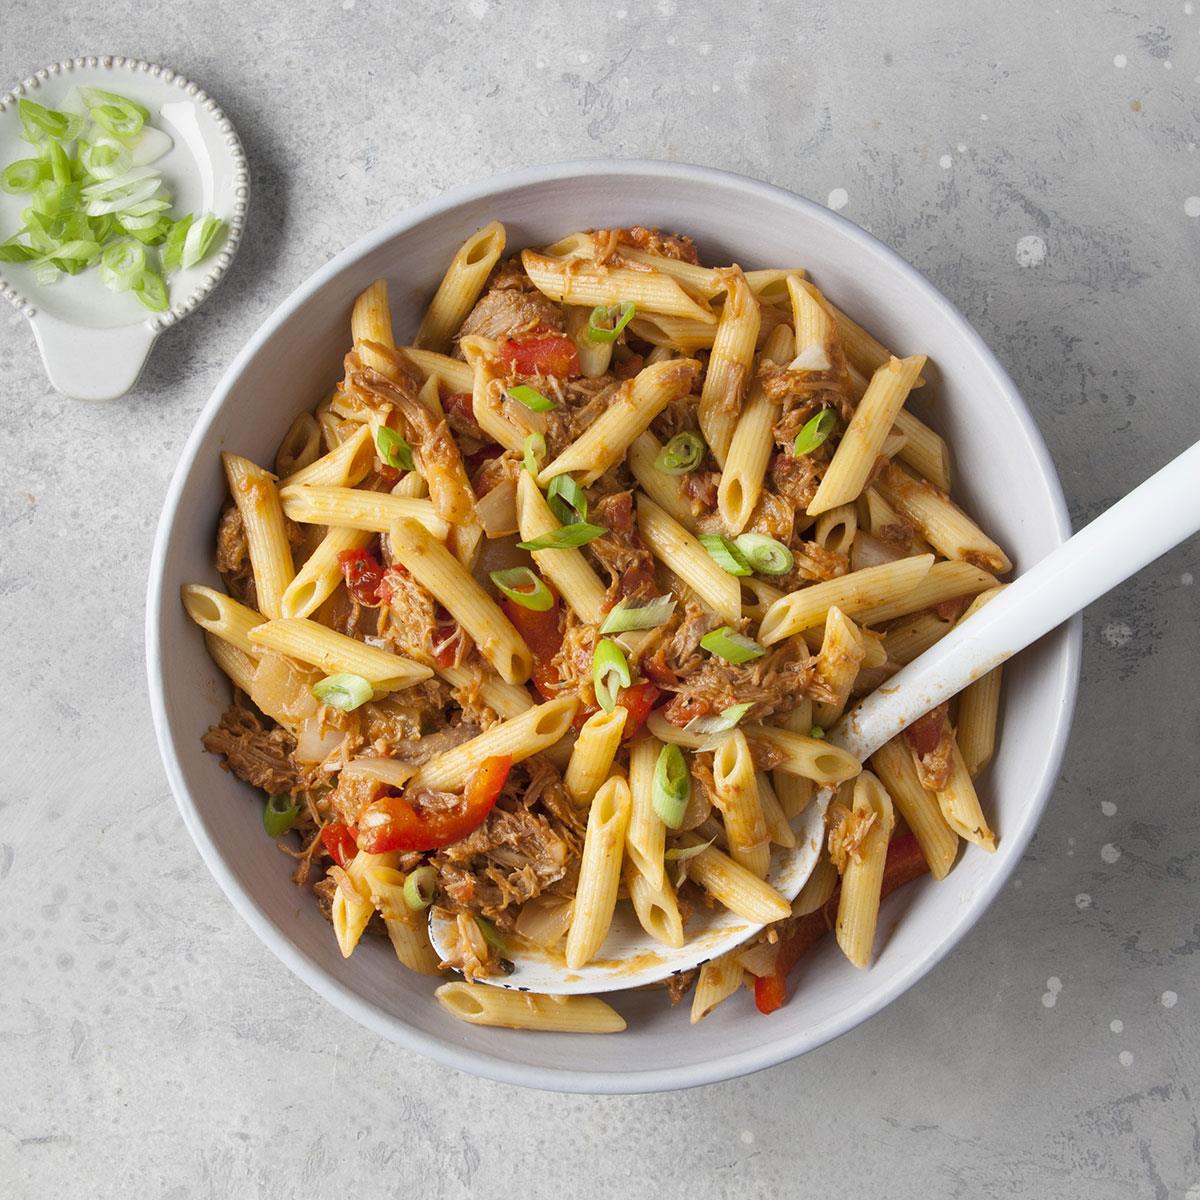 Barbecue Pork And Penne Skillet Recipe How To Make It Taste Of Home